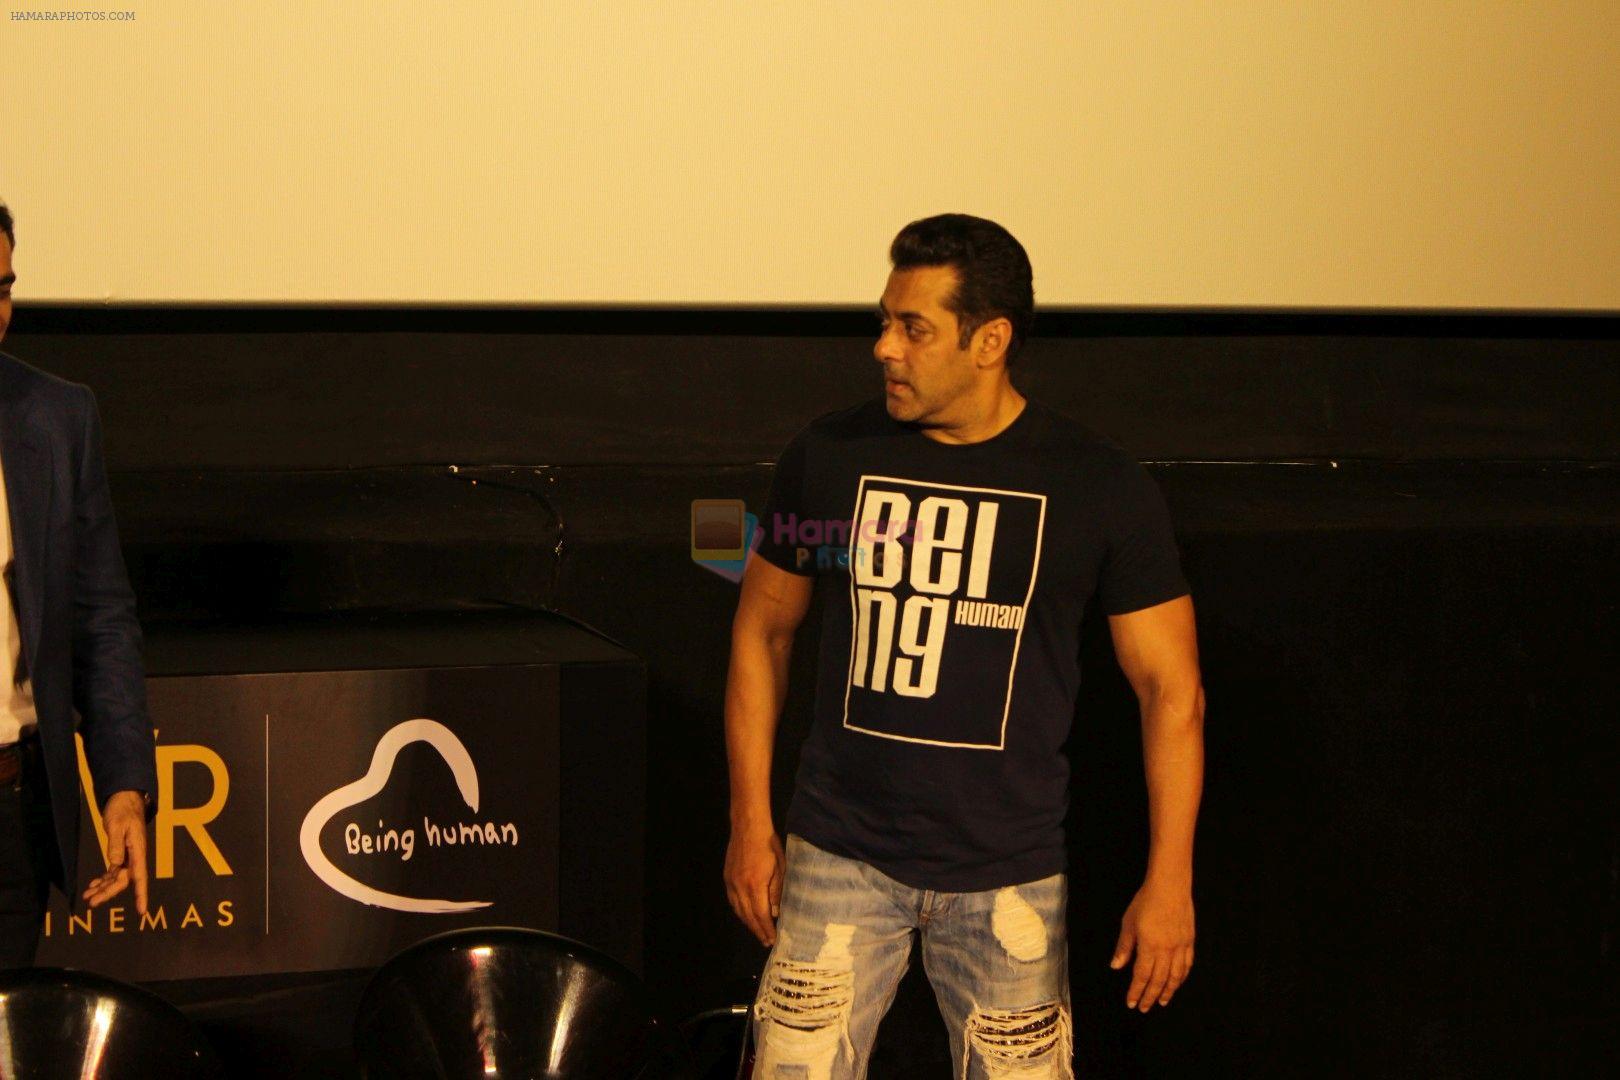 Salman Khan Being Human Joins Hands With Pvr For An Initiative on 23rd June 2016